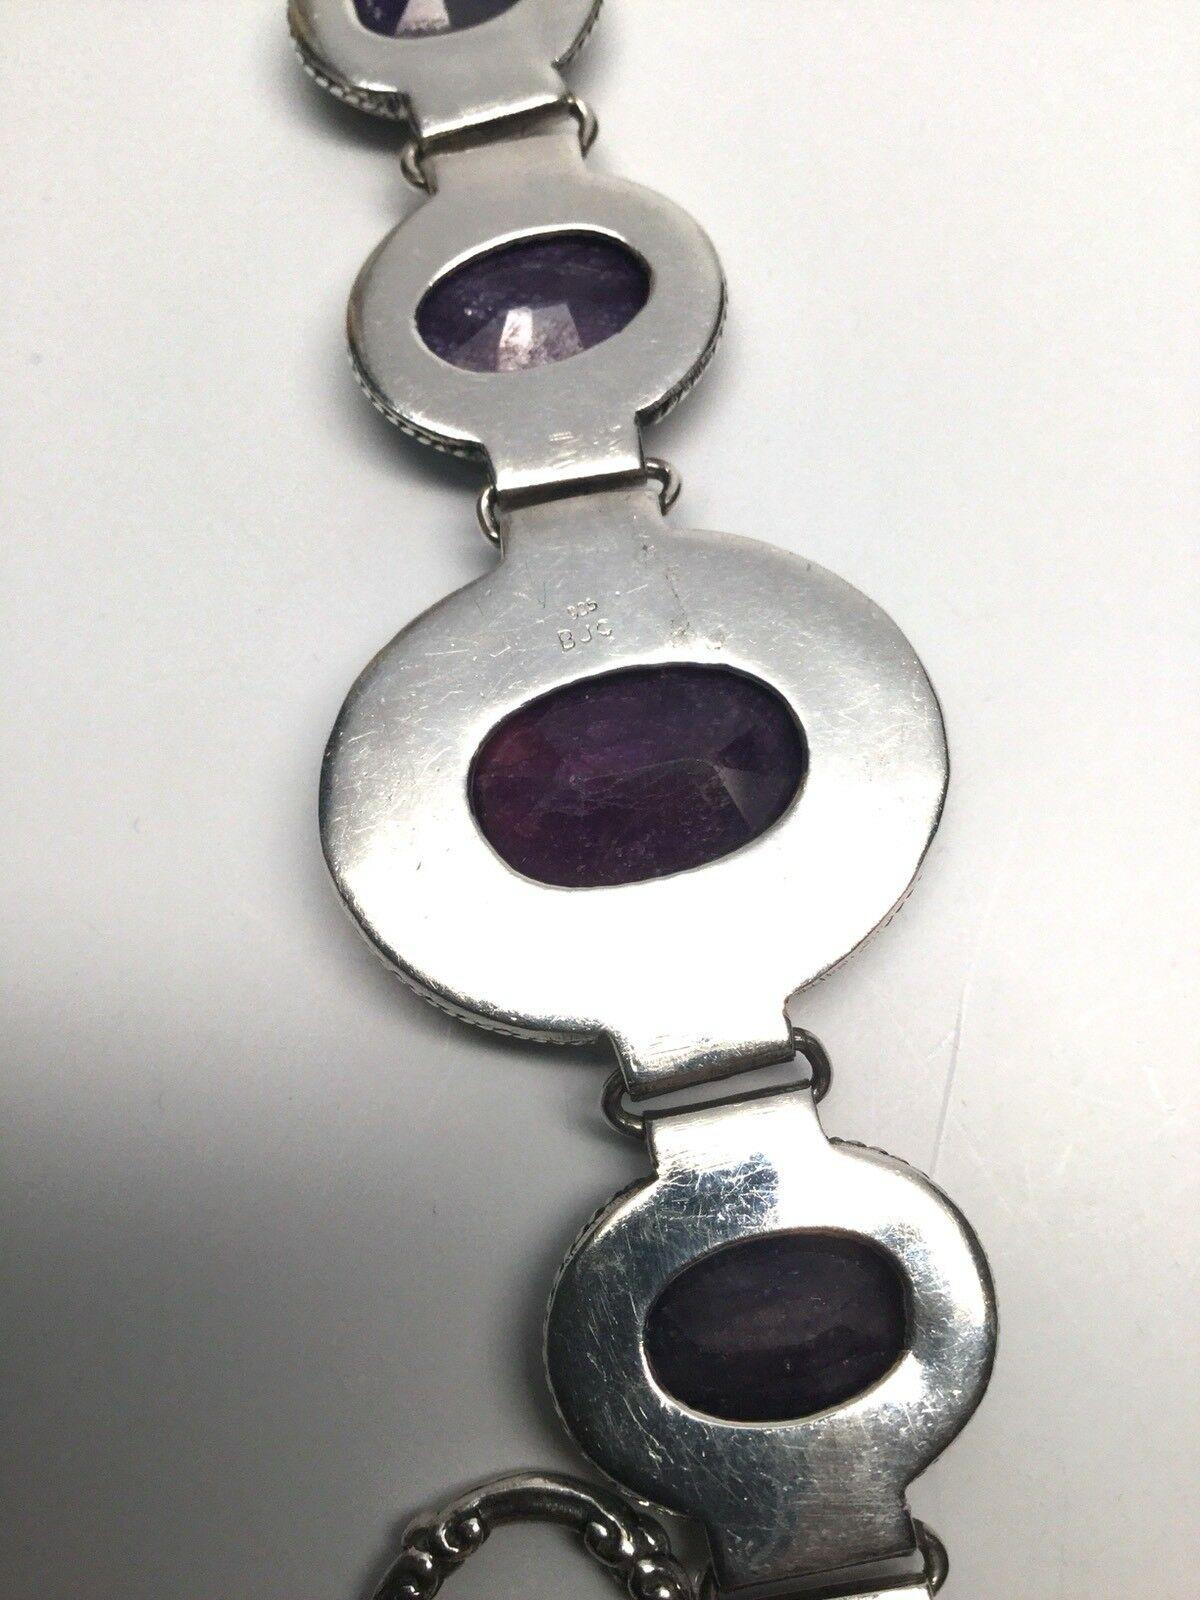 Samuel J Benham BJC Sterling Silver Purple Amethyst Toggle Bracelet

Measurement:  Approx 8 3/4 inches long.  The largest stone measures approx. 18 mm length x 13 mm width.

Weight:  25.7 dwt / 40 g

Condition:  In good condition with some minor